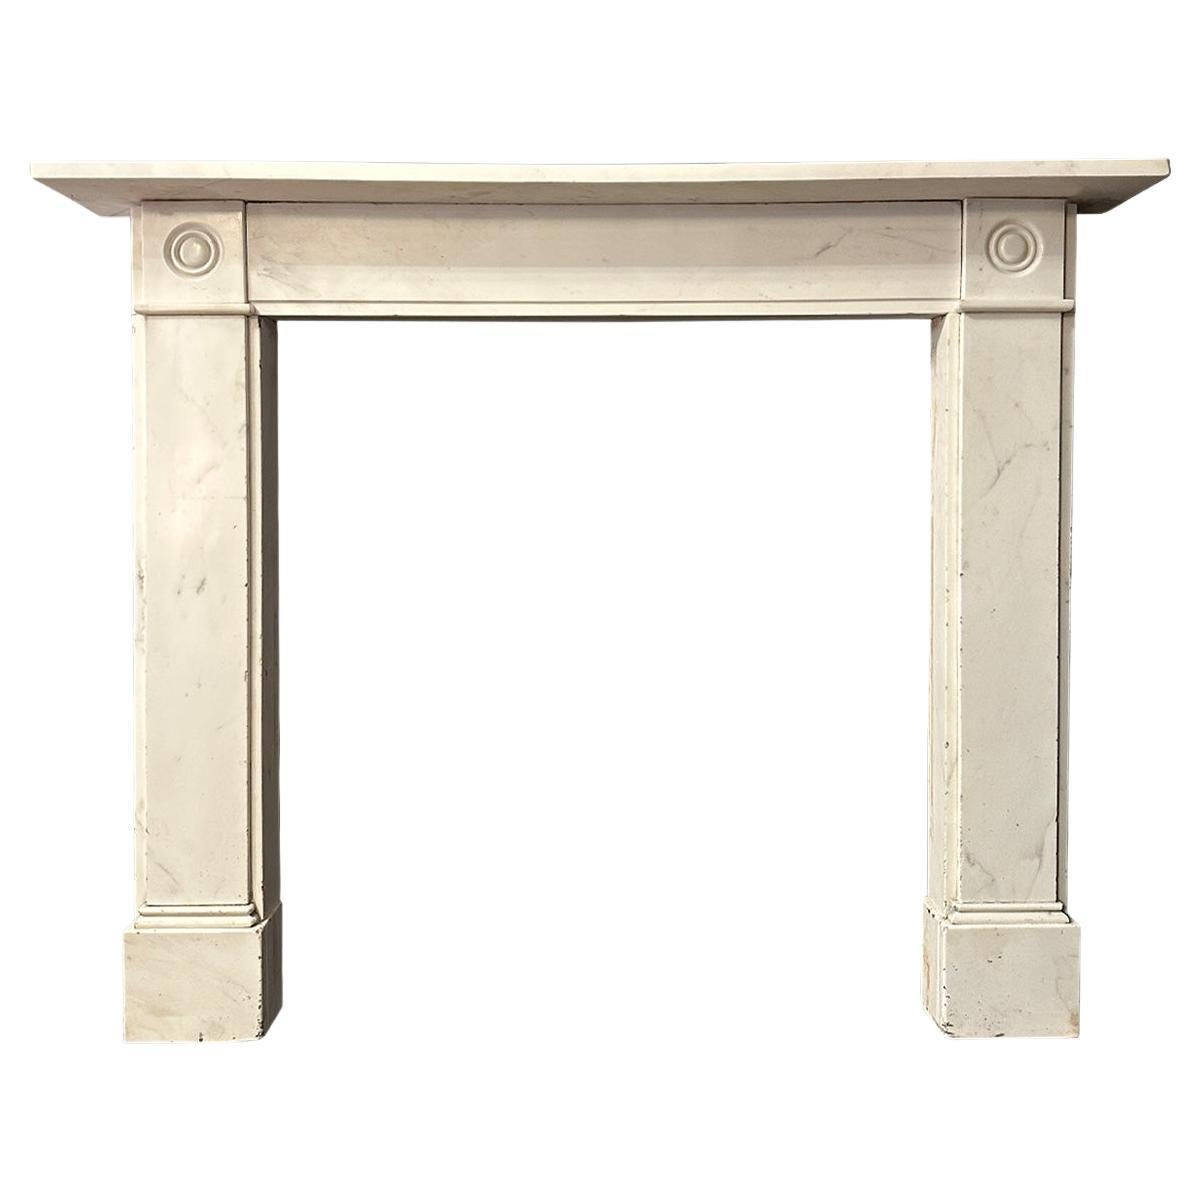 An Antique English Regency Statuary White Marble Fireplace mantel 